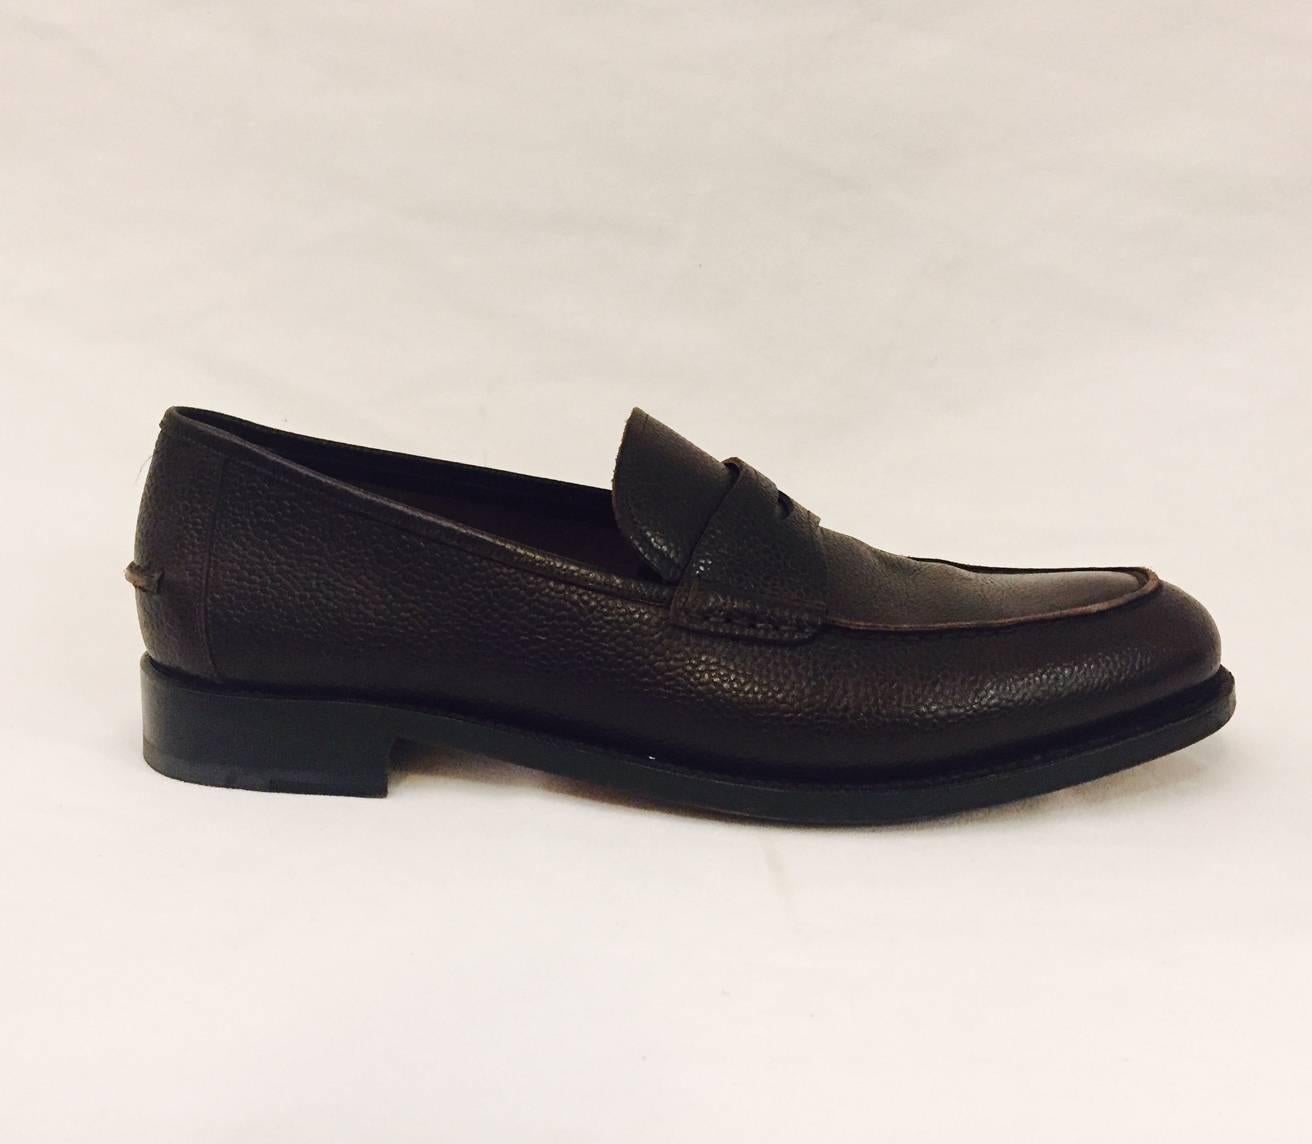 Classic penny loafer from the top of the line Tramezza collection.  Made by Italian craftsmen in traditional methods,  a rich cocoa colour in a pebble texture calf skin leather, slightly padded insole,  with leather sole, and a one inch heel.  Very